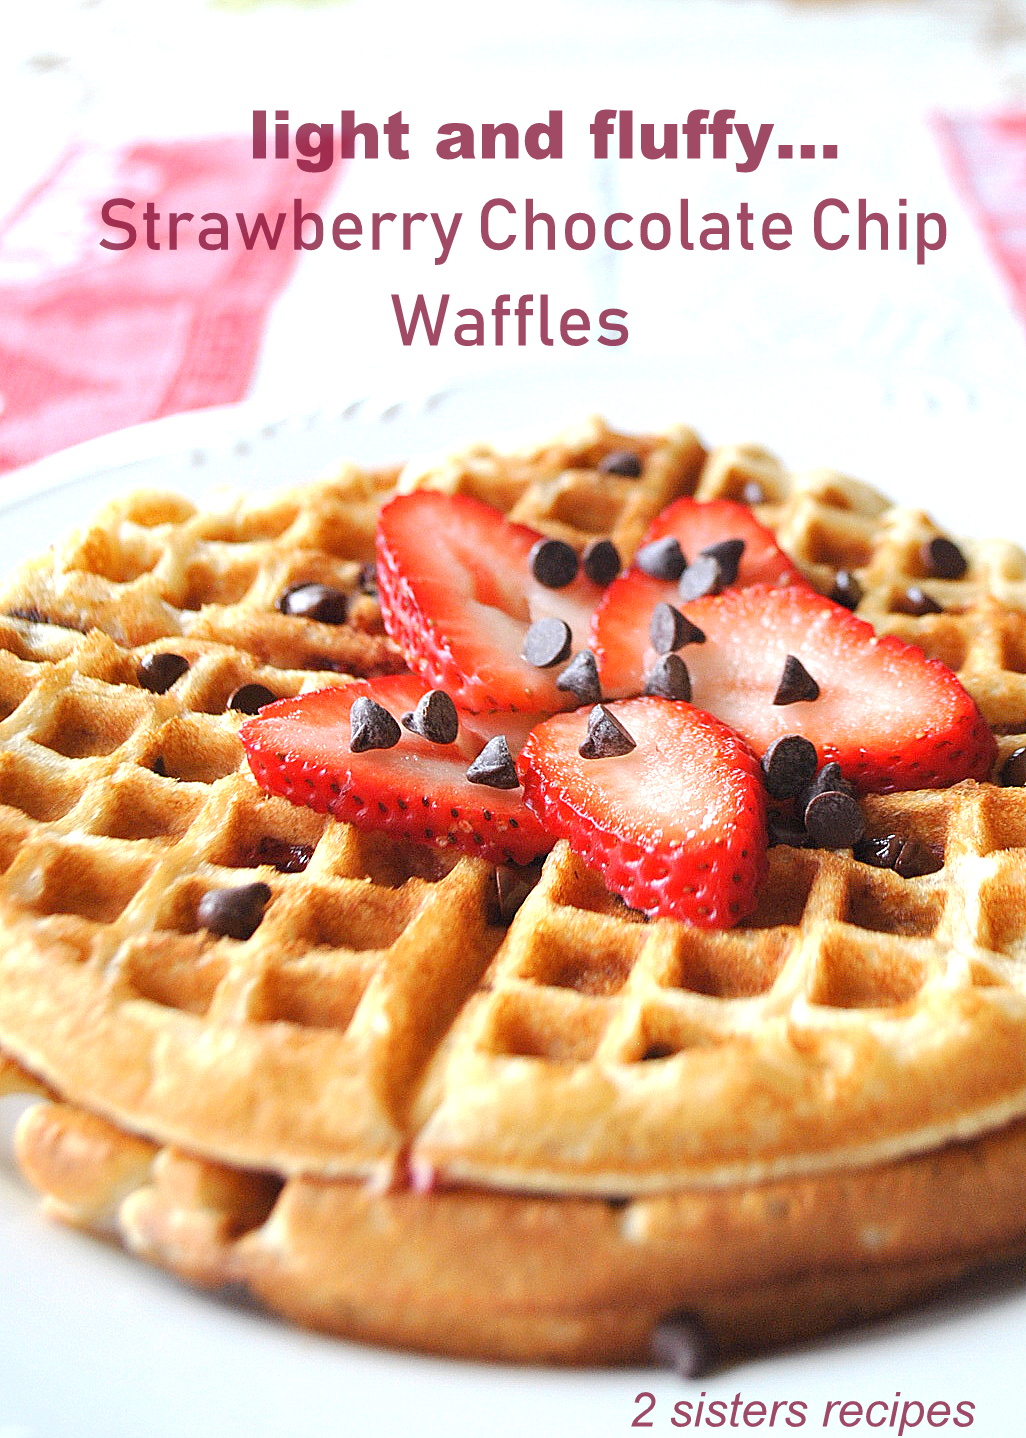 Round shape waffles with mini chocolate chips and sliced strawberries on top.